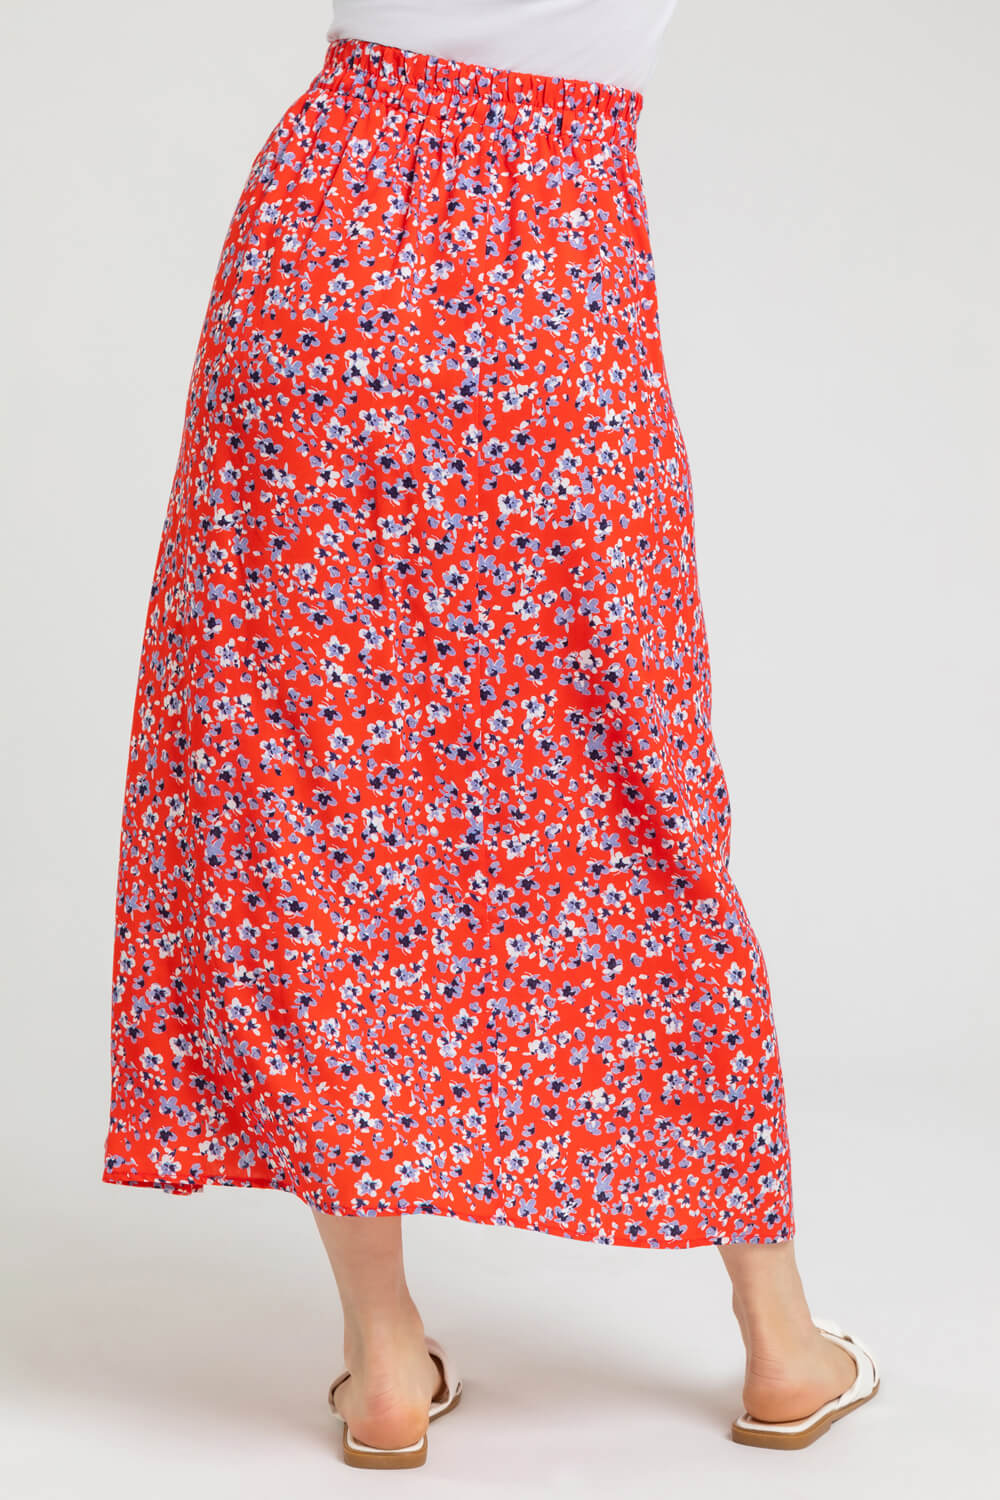 Petite Ditsy Floral A-Line Skirt in Red | Roman UK